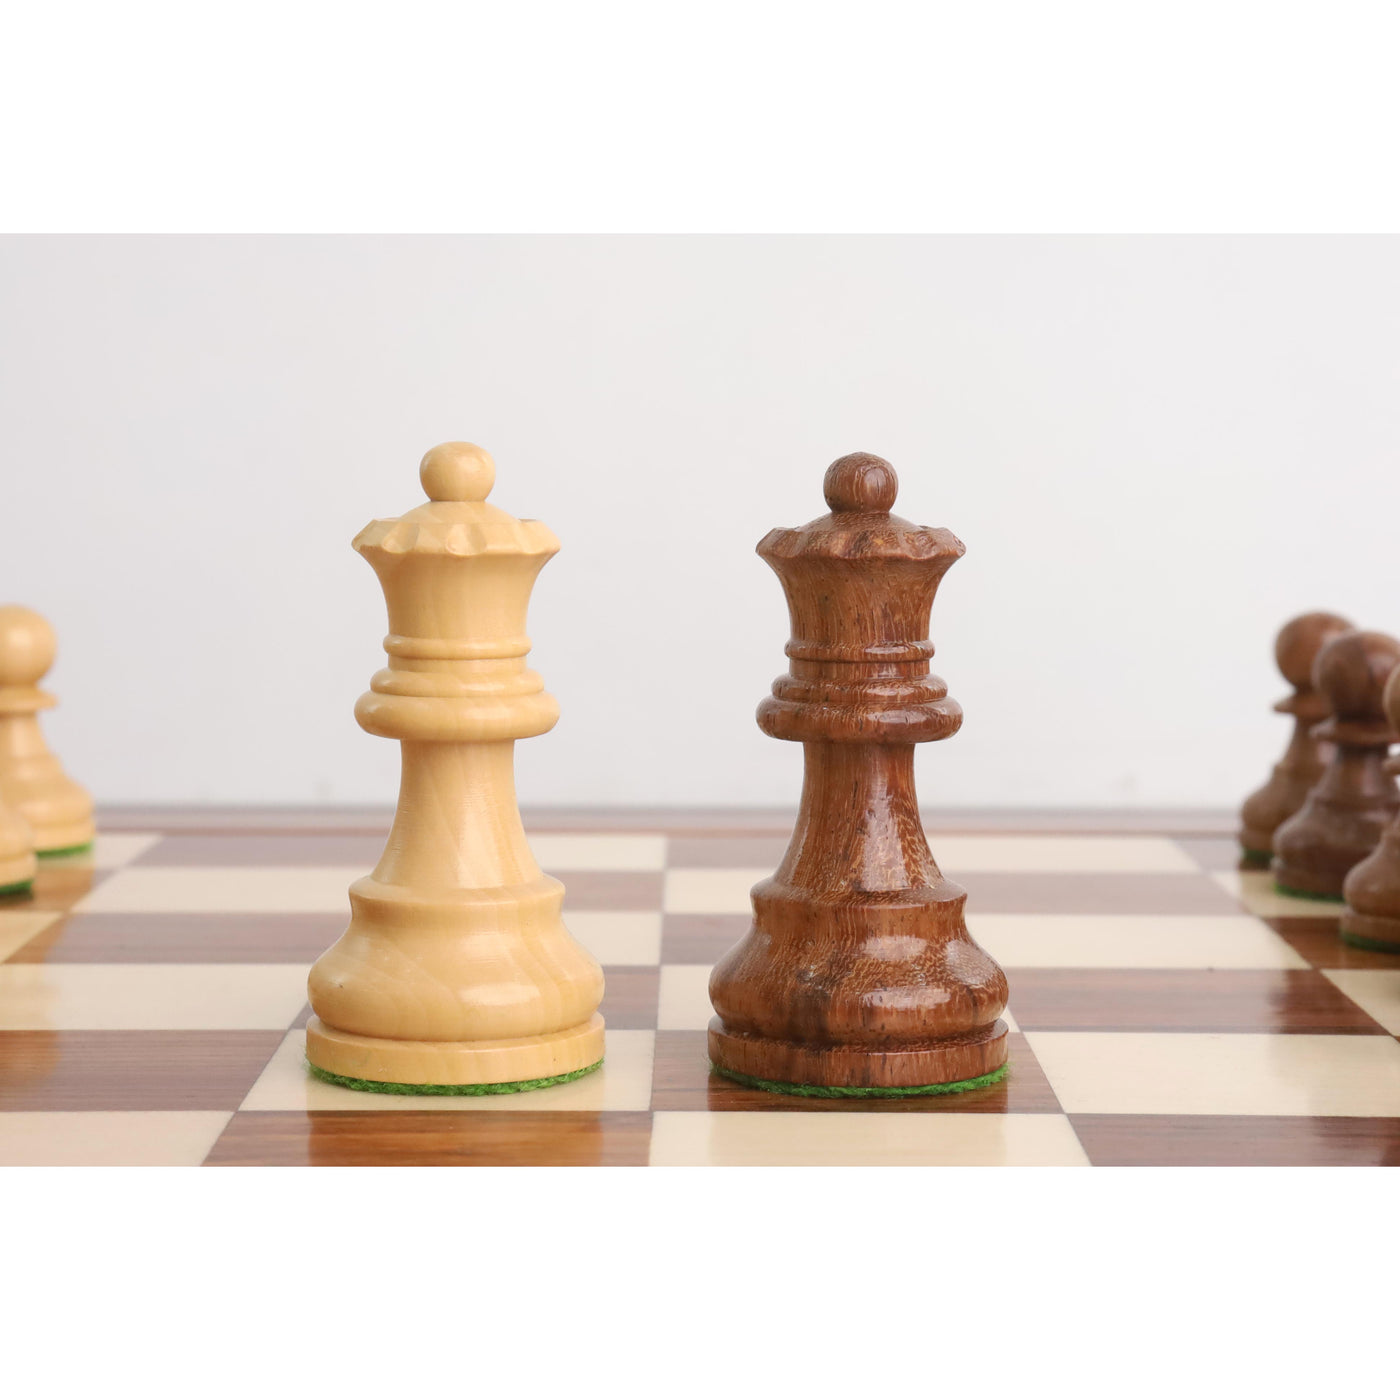 2.8" Tournament Staunton Chess Set - Chess Pieces Only - Golden Rosewood - Compact size